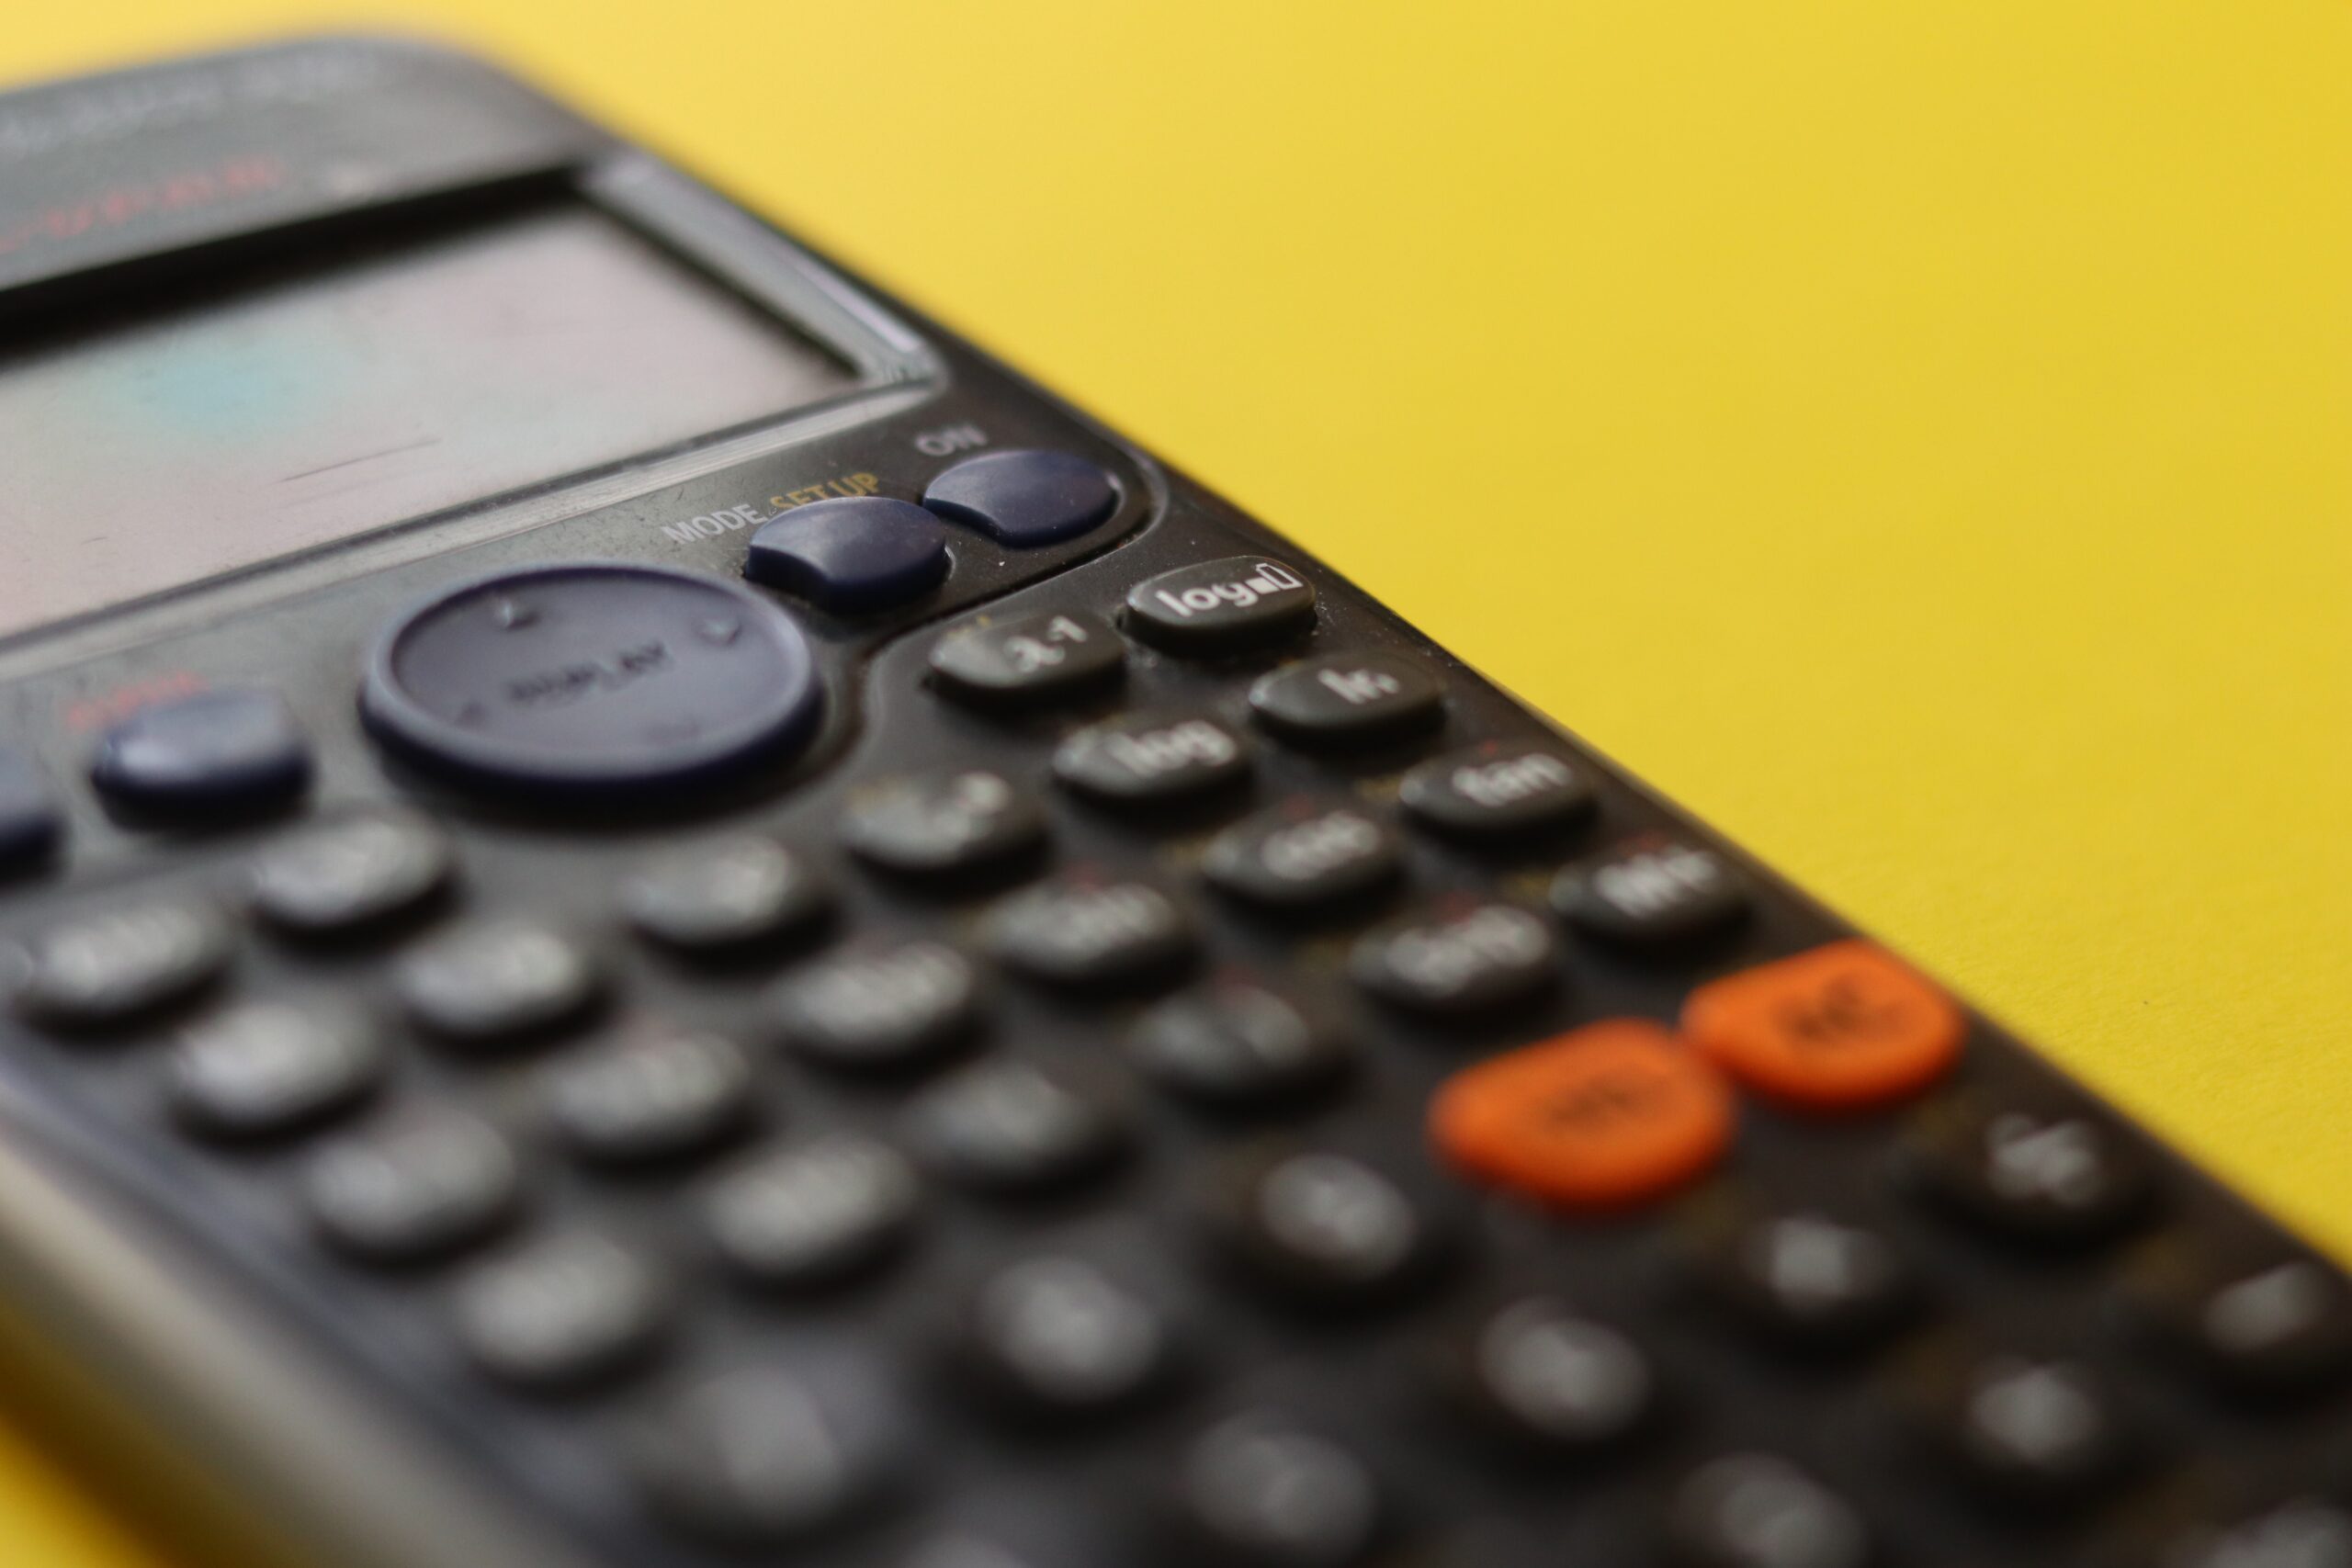 Calculator placed on a yellow background